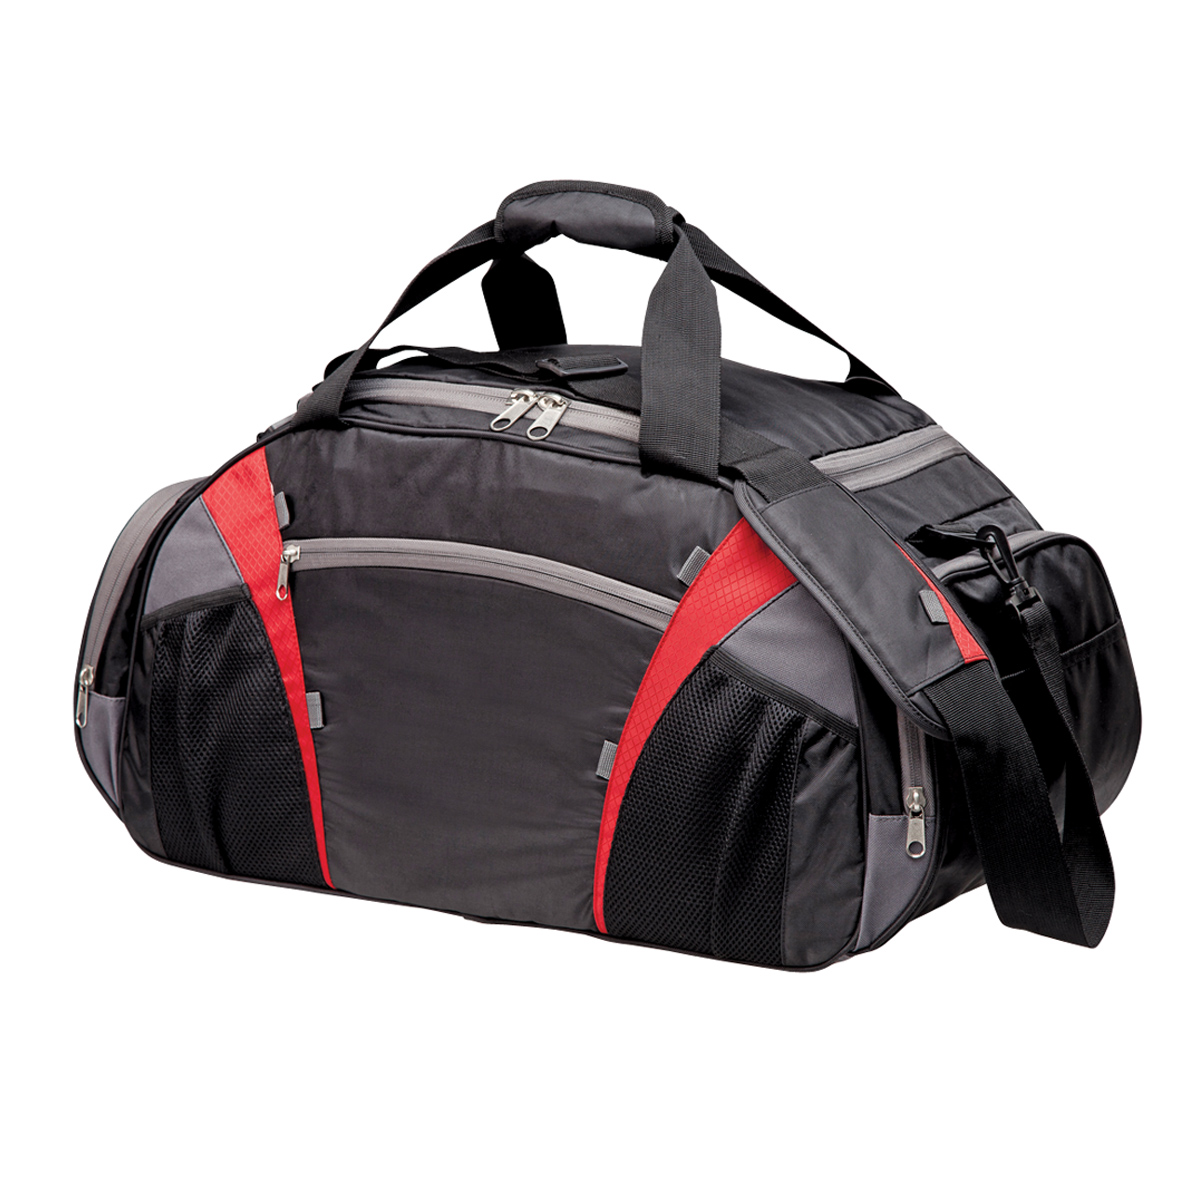 Chicane Sports Bag - Image Group